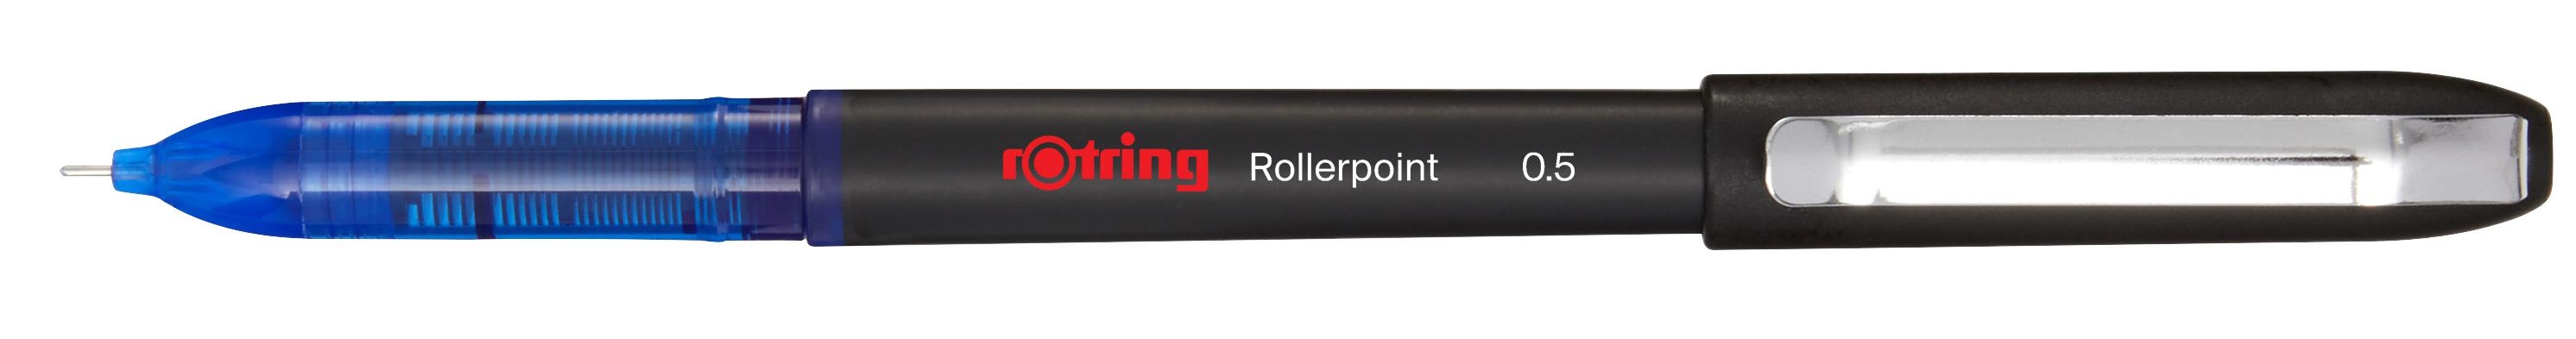 ROTRING Rollerpoint 0.5mm 2146105 bleu